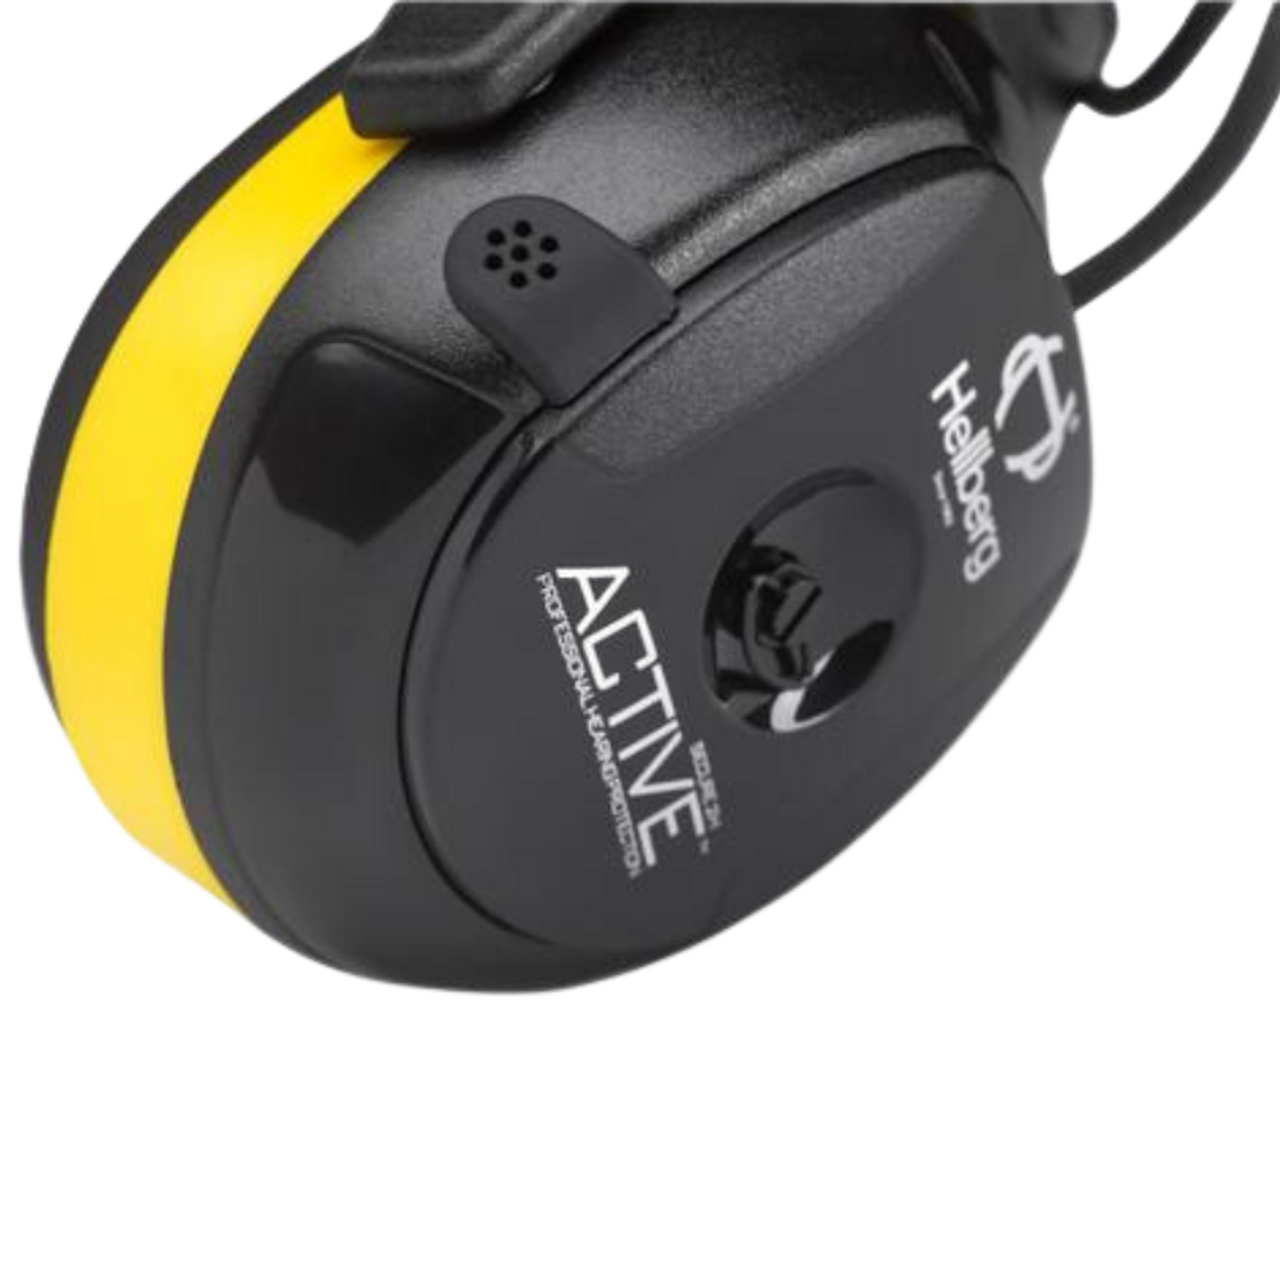 HELLBERG Ear Muffs | ACTIVE Class 2 AUX Input, Active Monitoring Earmuffs  with Headband for Excavator Operators, Landscapers in Melbourne, Sydney and Brisbane.